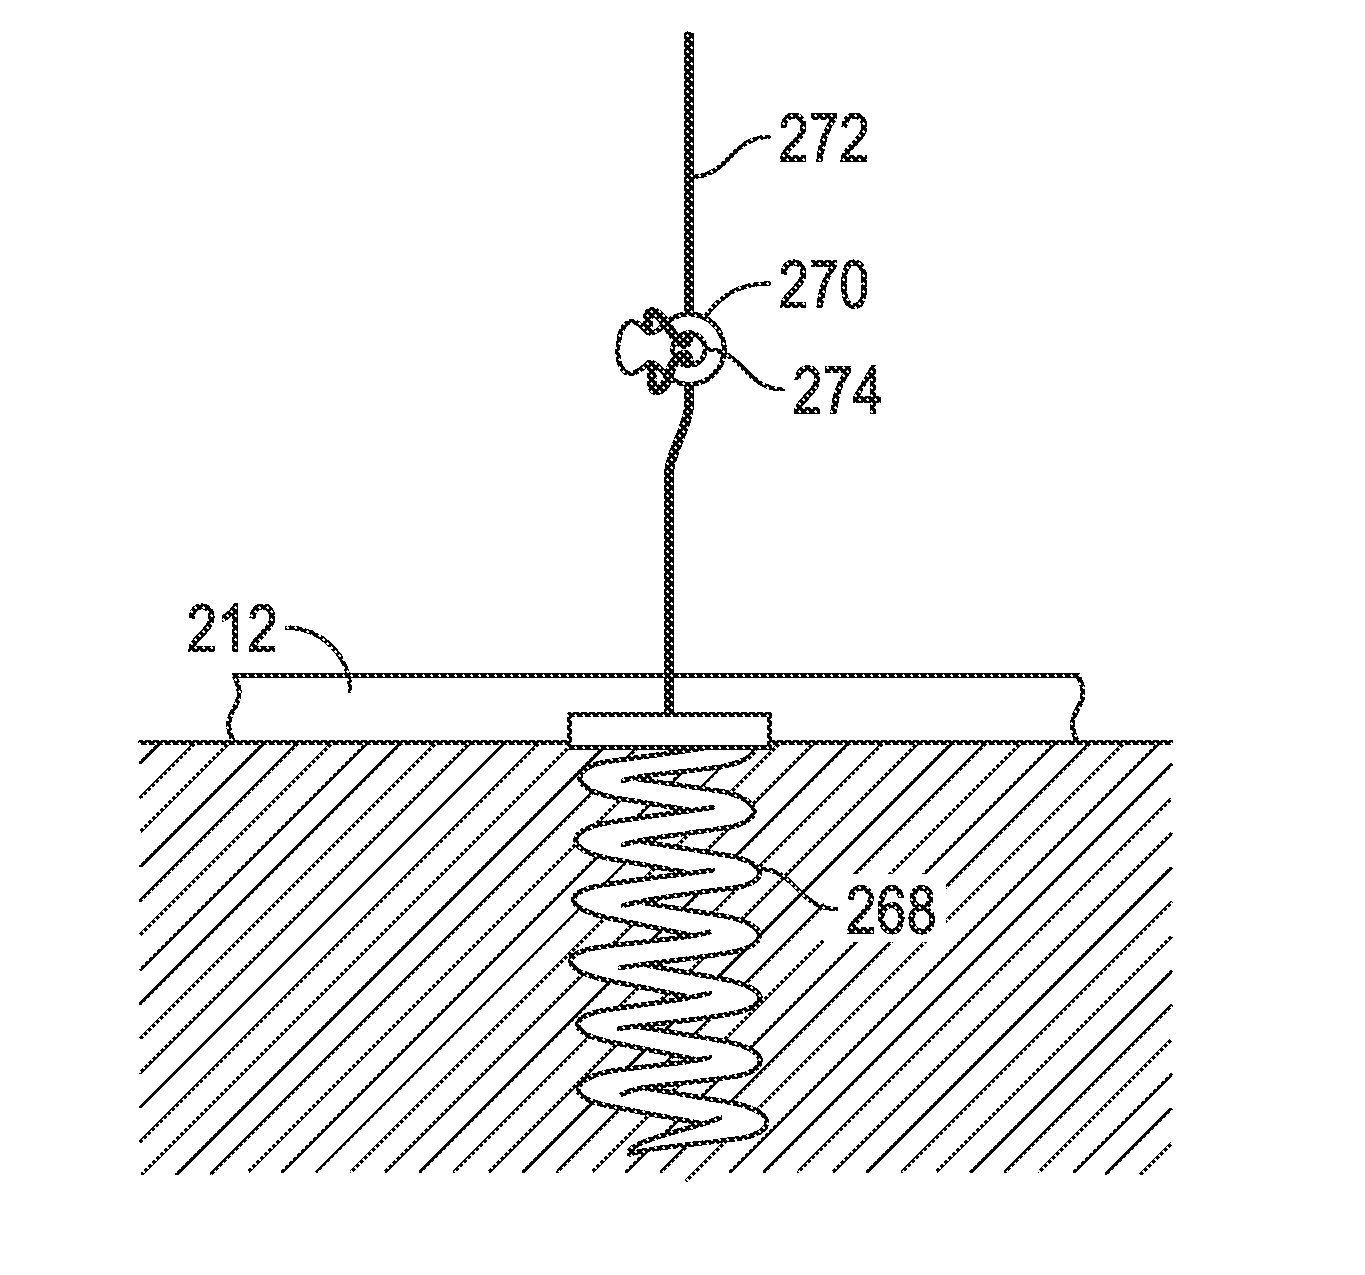 Systems and methods for anchoring an implant